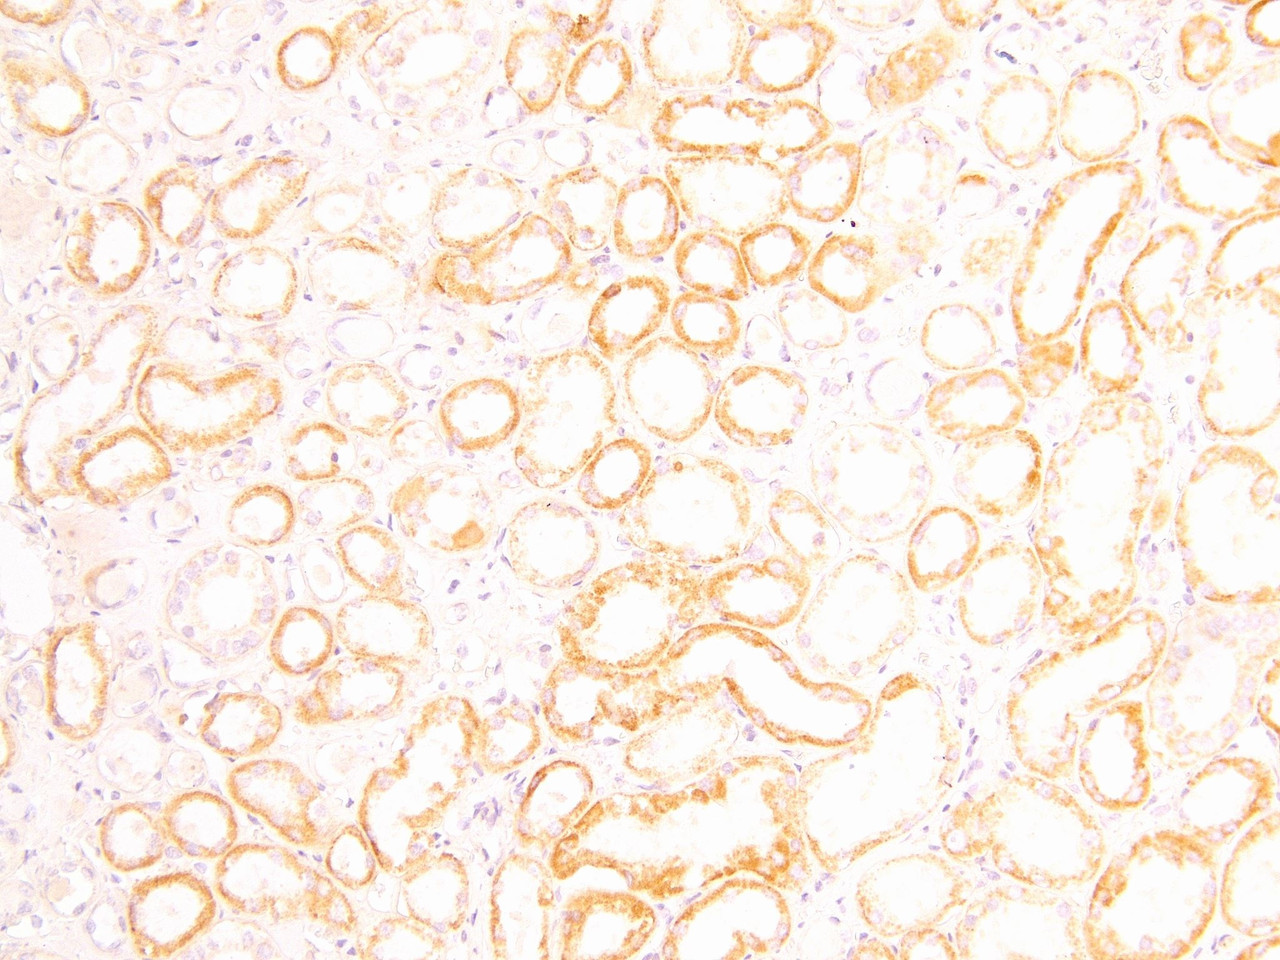 45-606 (3.75ug/ml) staining of paraffin embedded Human Kidney. Heat induced antigen retrieval with citrate buffer pH 6, HRP-staining.